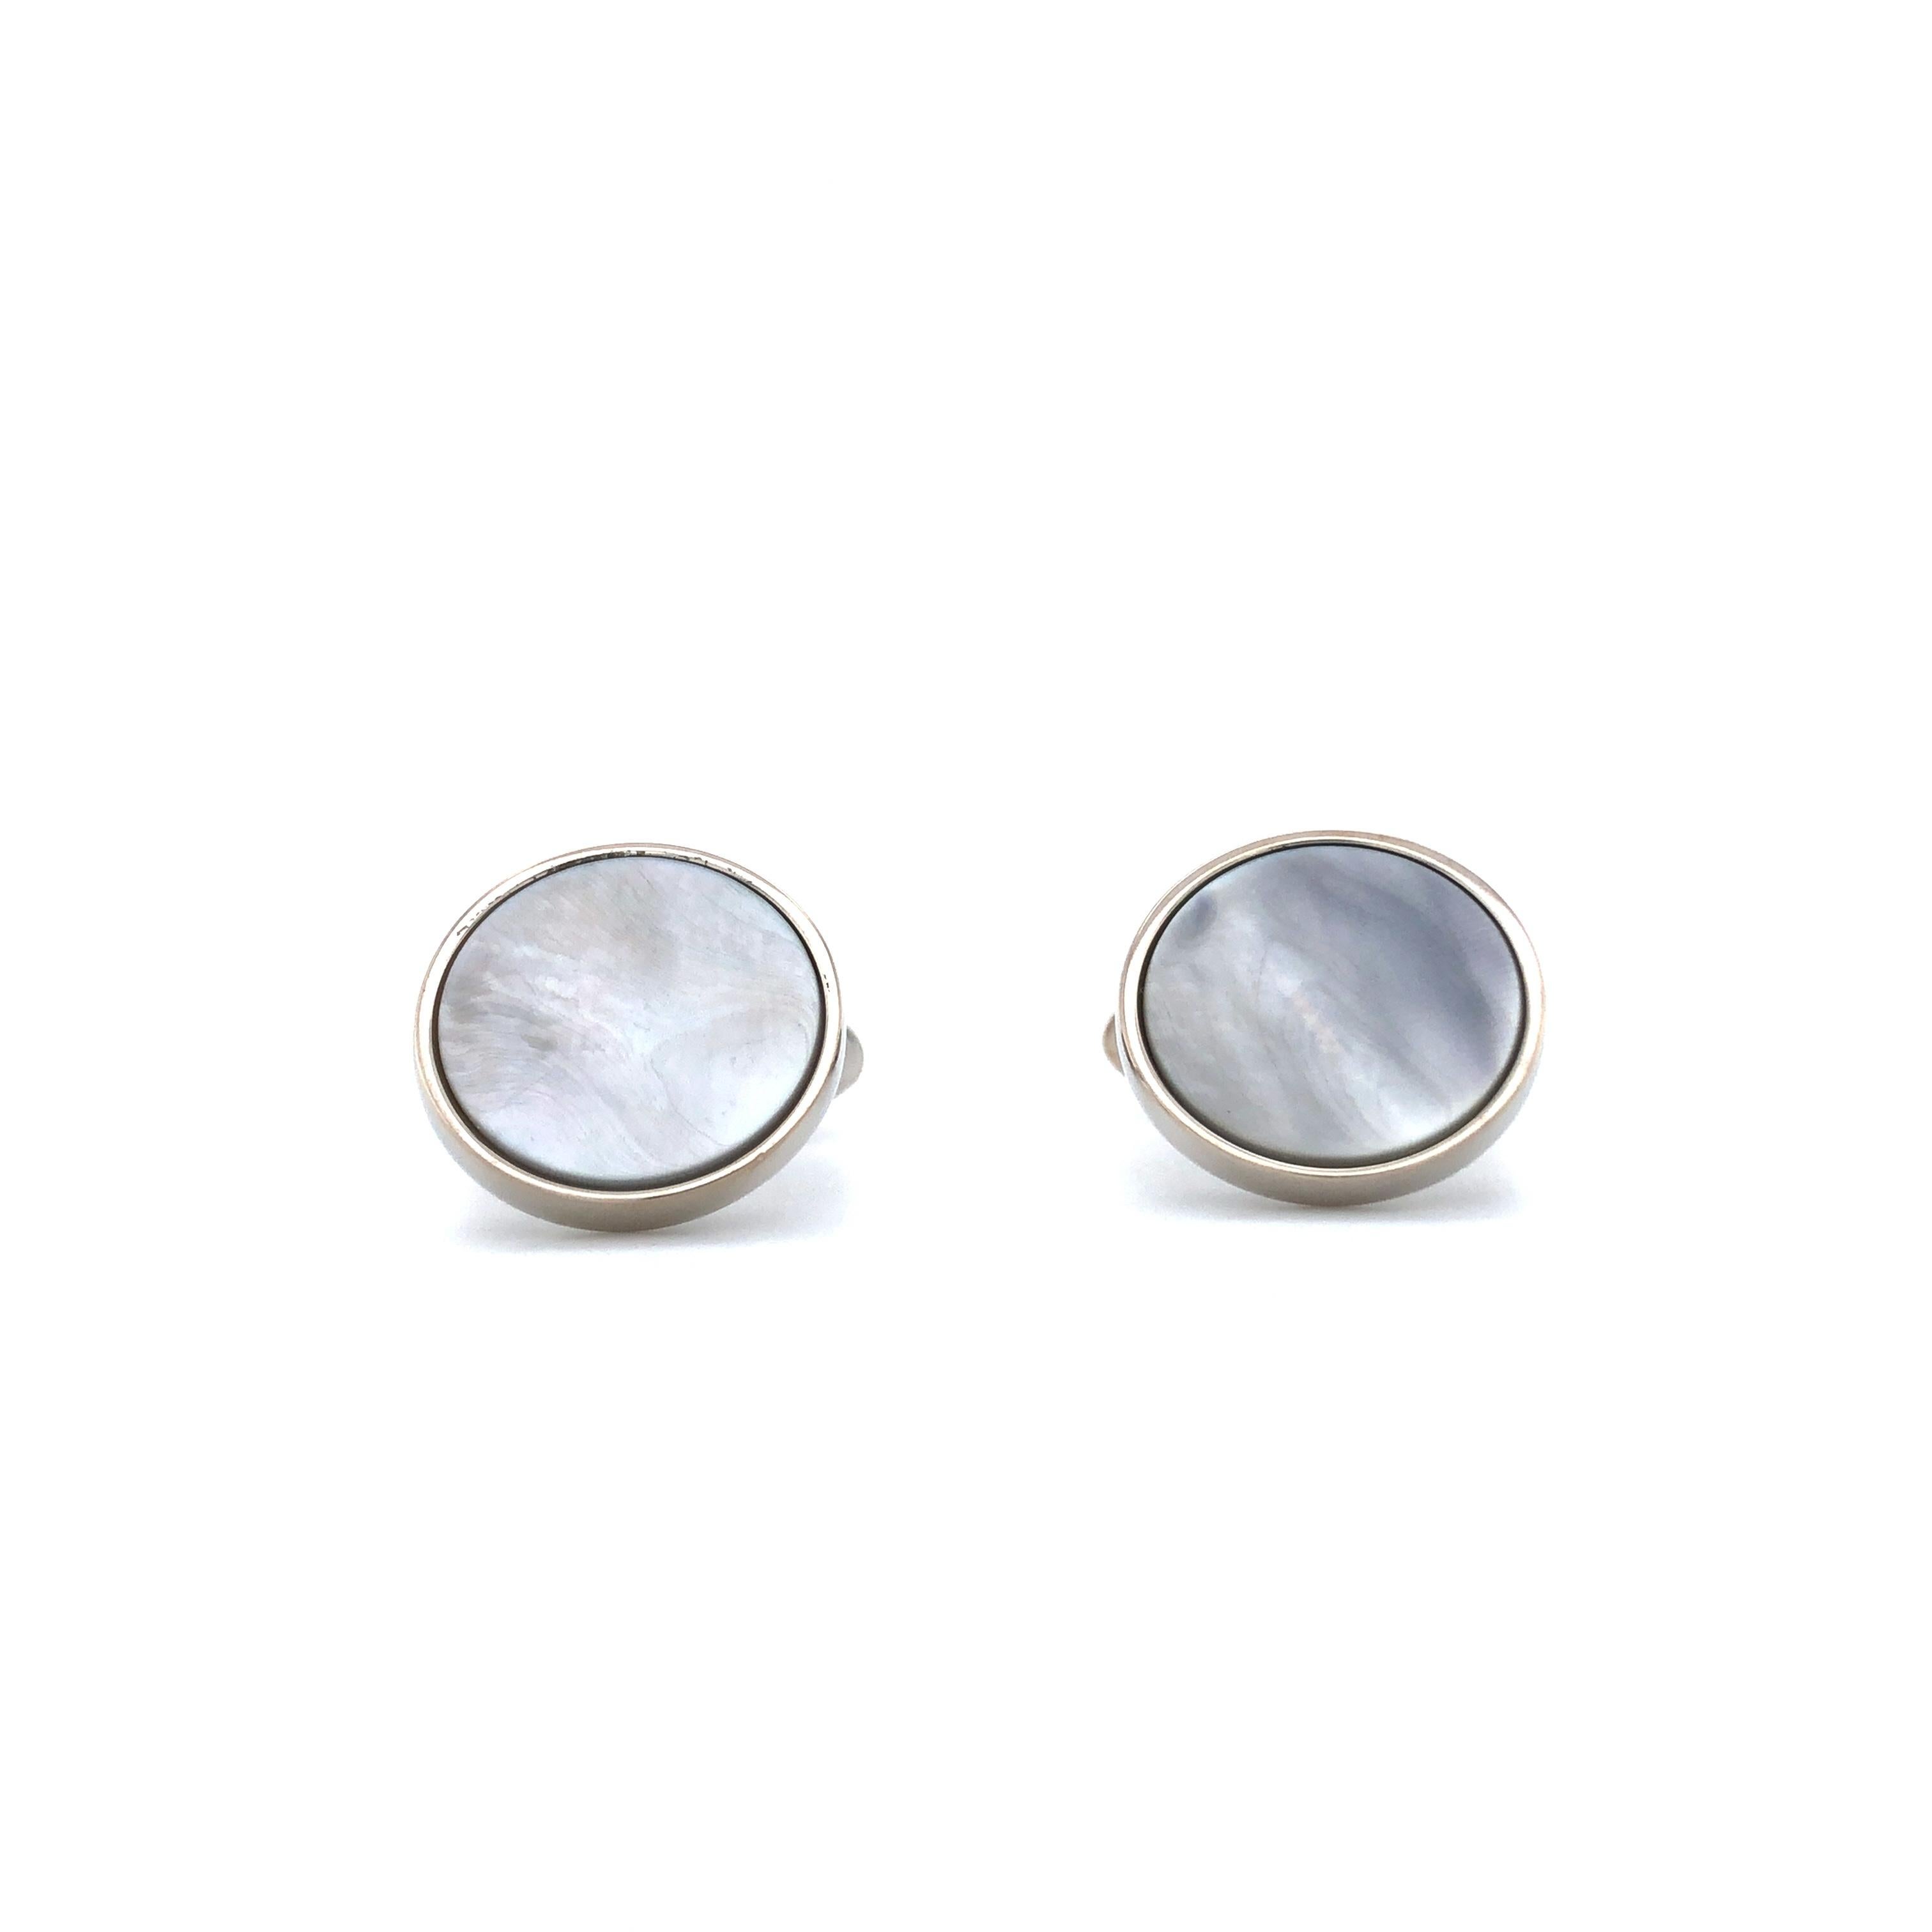 Round Cufflinks - Hallmark Collection by Victor Mayer - 925 Sterling Silver - Mother of Pearl Inlay, Diameter 15 mm 

About the creator Victor Mayer
Victor Mayer is internationally renowned for elegant timeless designs and unrivalled expertise in